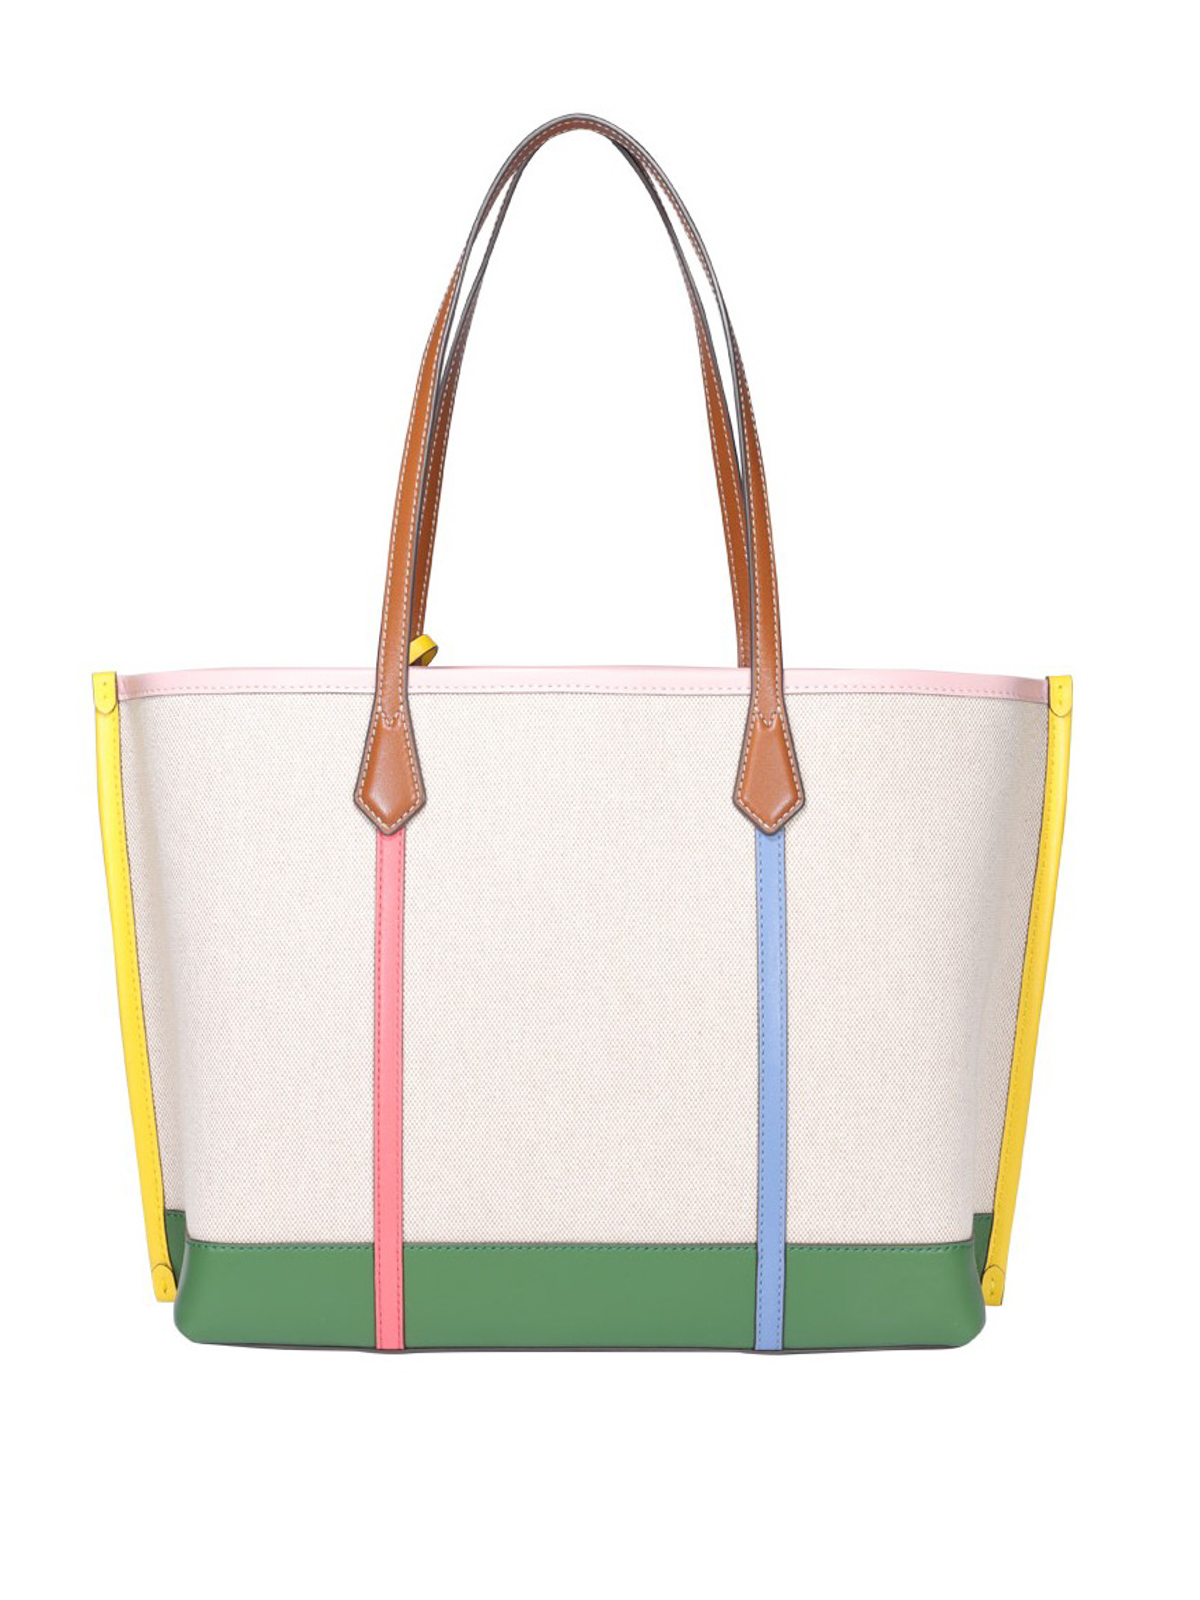 Totes bags Tory Burch - Perry canvas tote - 64475254